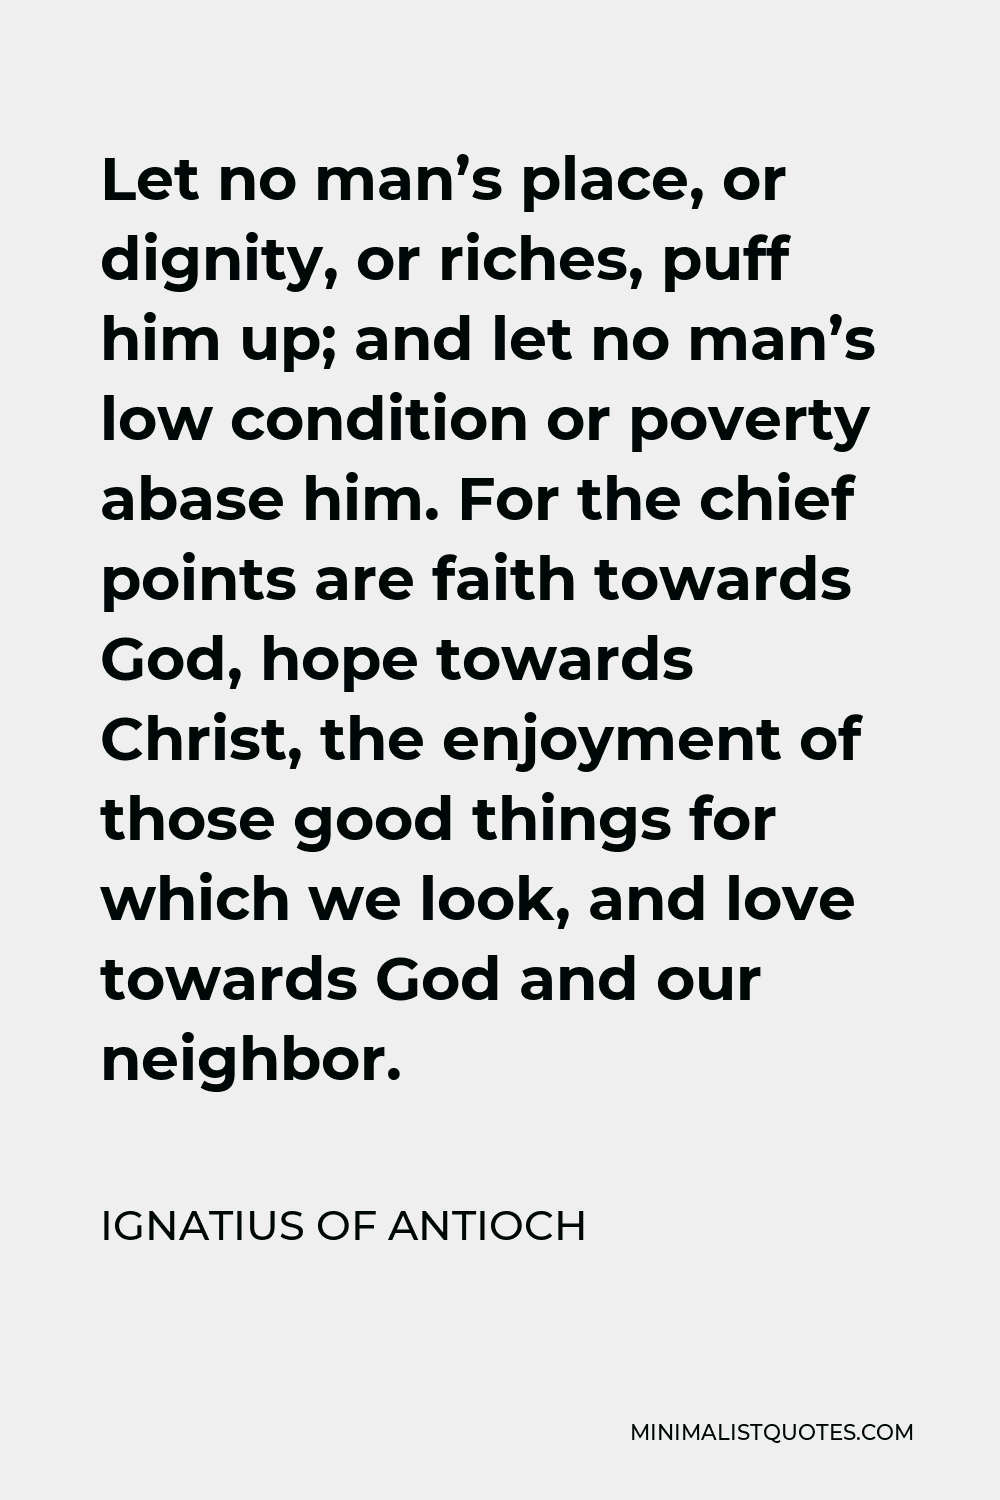 Ignatius of Antioch Quote - Let no man’s place, or dignity, or riches, puff him up; and let no man’s low condition or poverty abase him. For the chief points are faith towards God, hope towards Christ, the enjoyment of those good things for which we look, and love towards God and our neighbor.